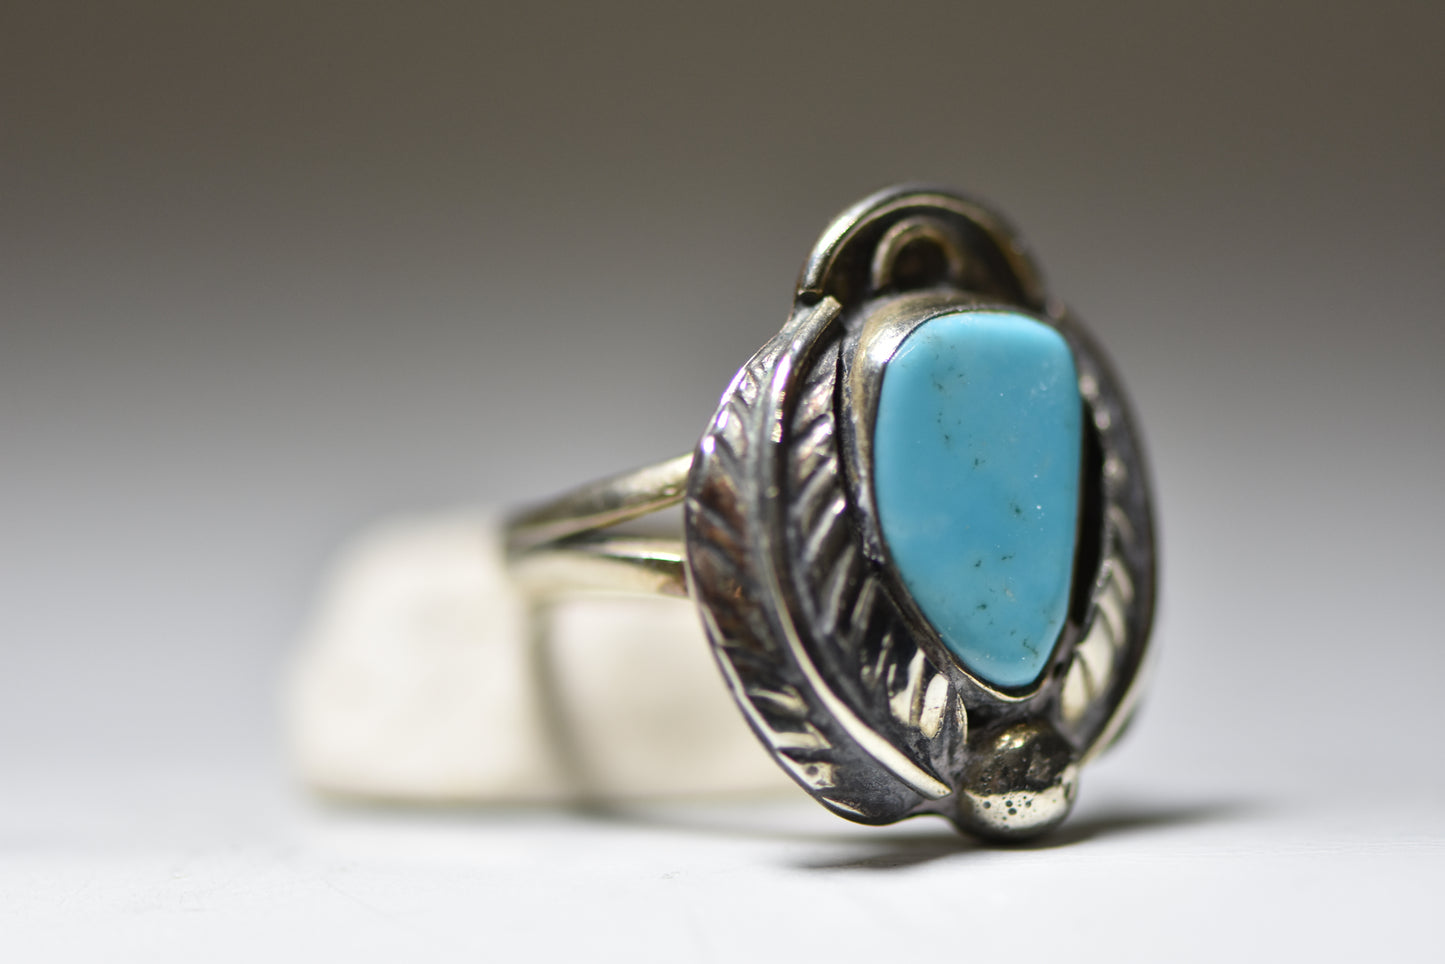 Turquoise Ring Navajo southwest feathers girls women sterling silver